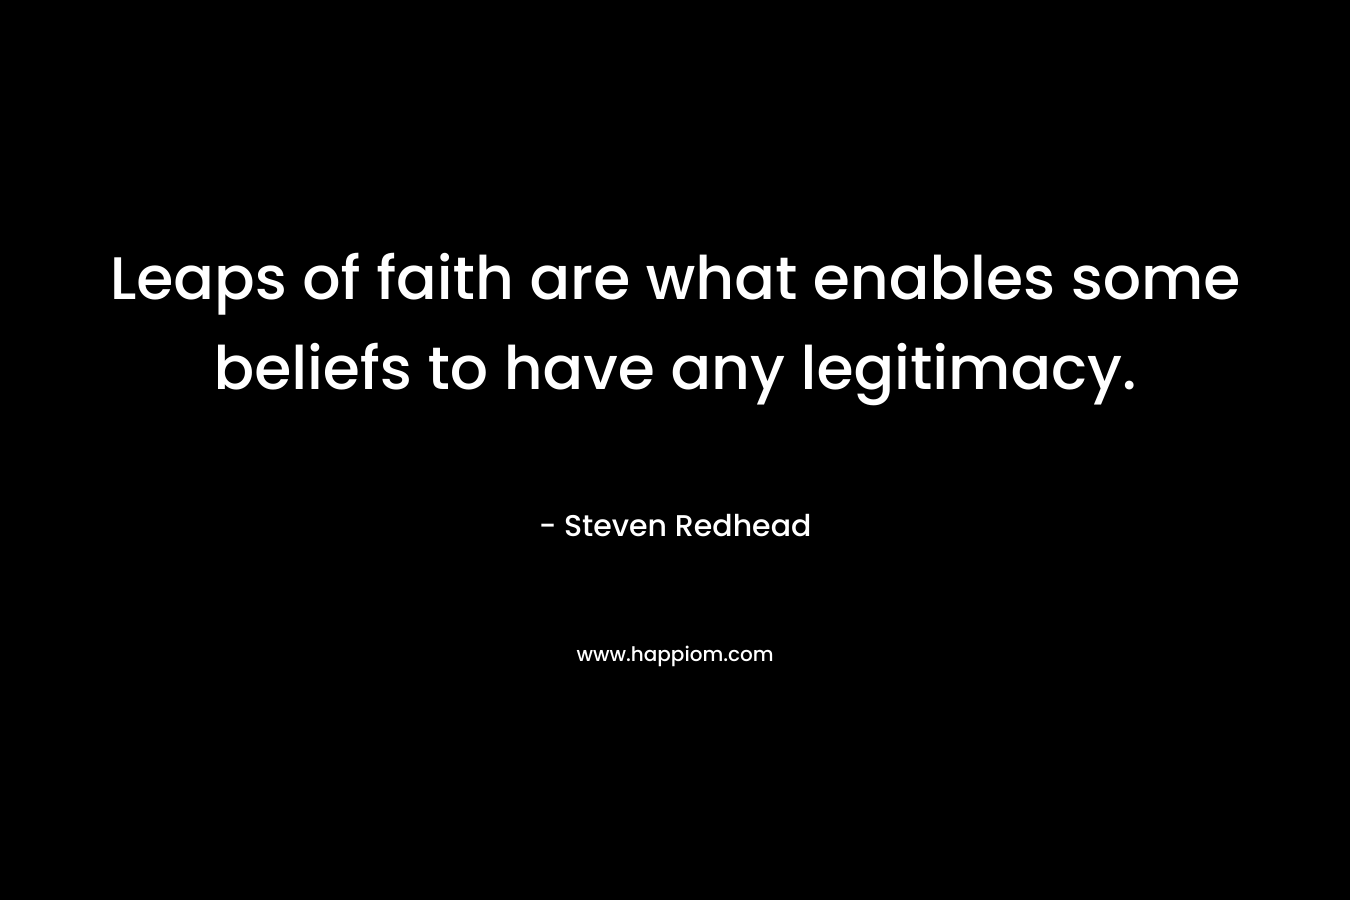 Leaps of faith are what enables some beliefs to have any legitimacy. – Steven Redhead